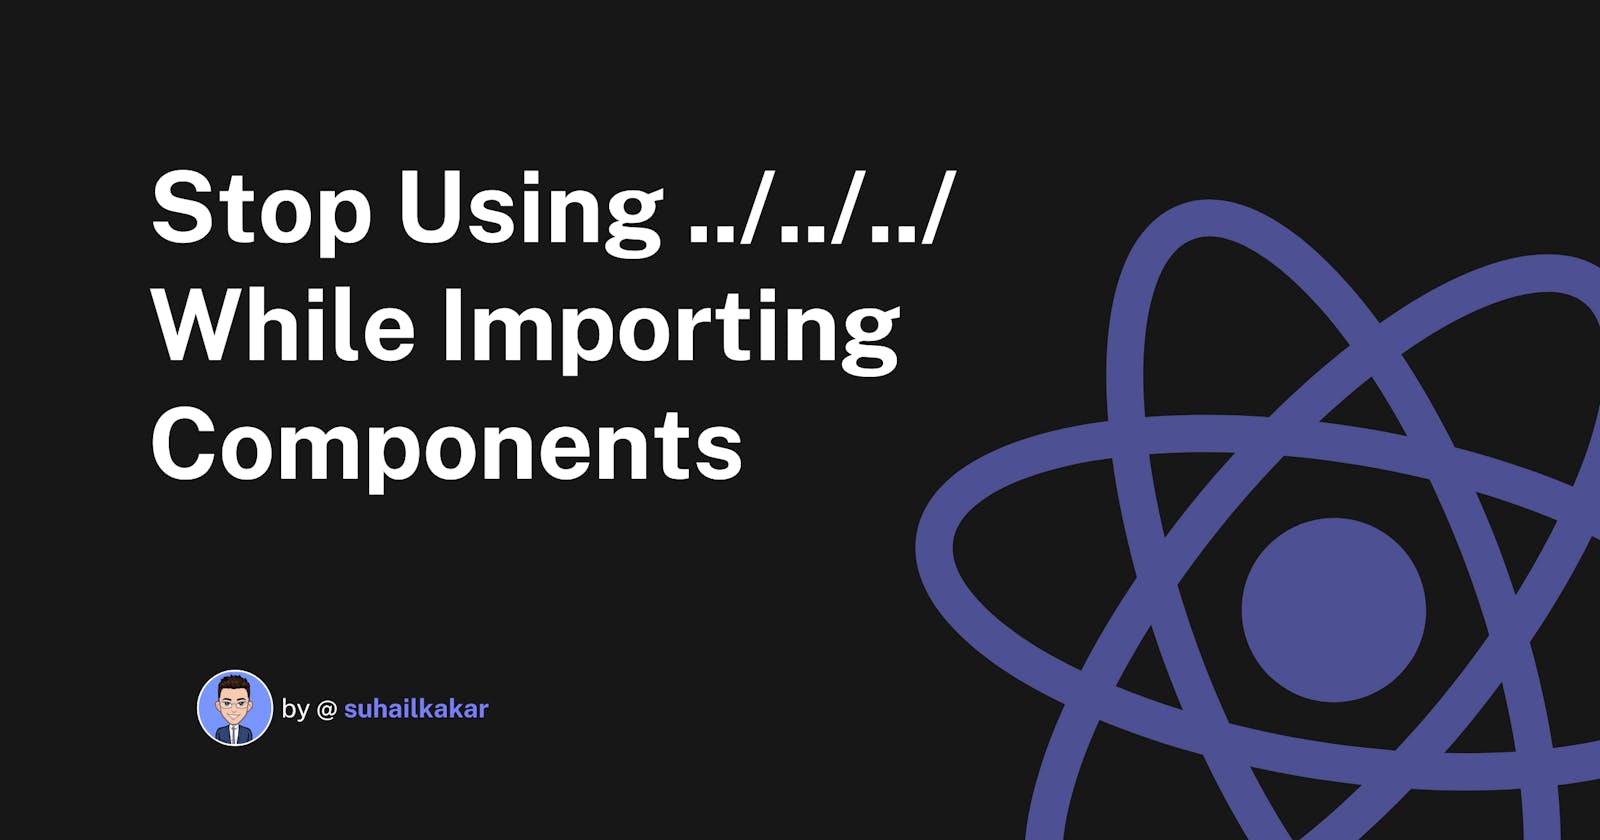 Stop Using ../../../ While Importing Components, Instead Use This Method